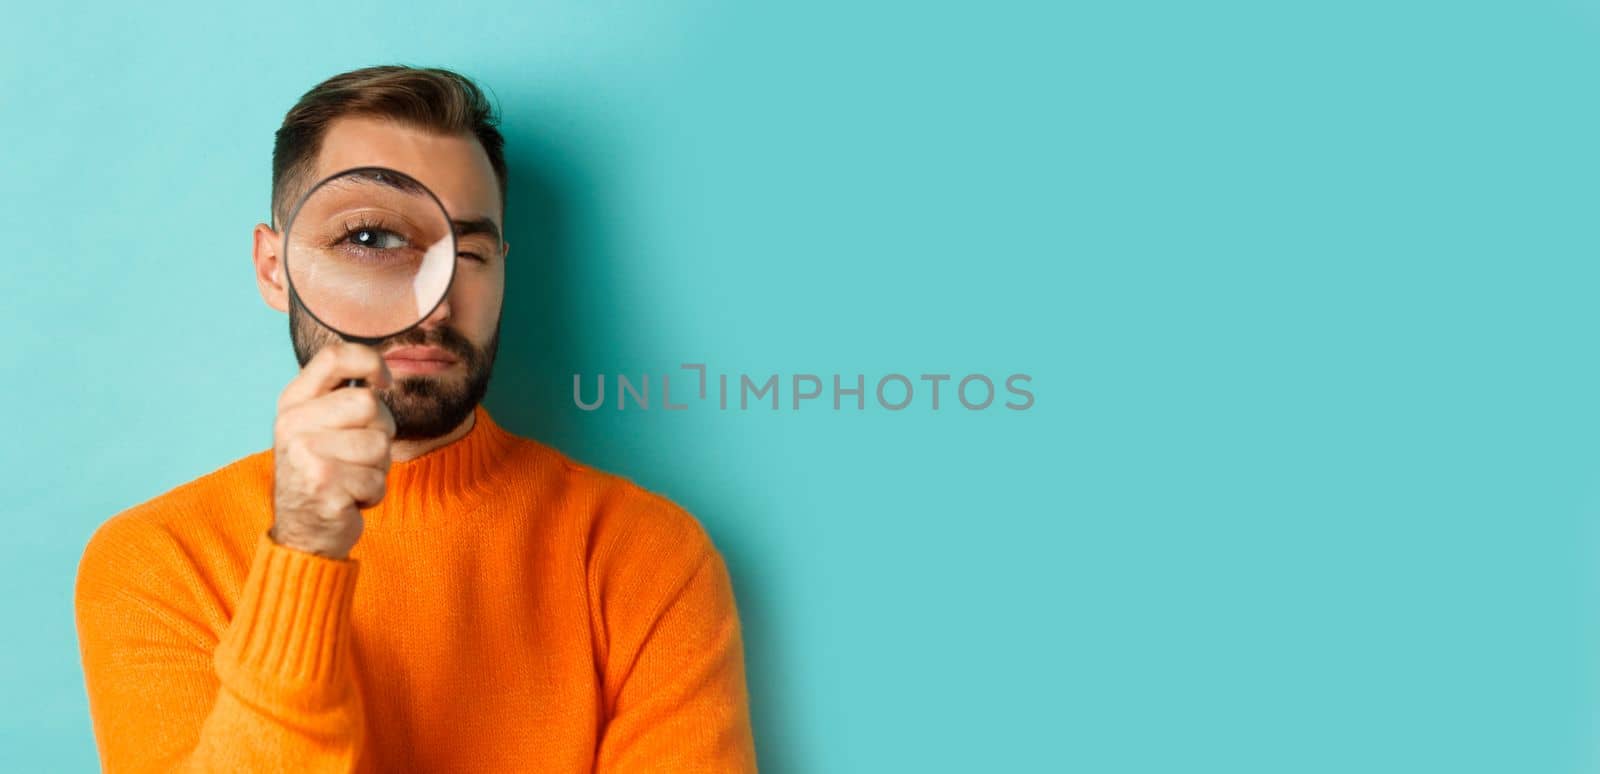 Funny man looking through magnifying glass, searching or investigating something, standing in orange sweater against turquoise background by Benzoix